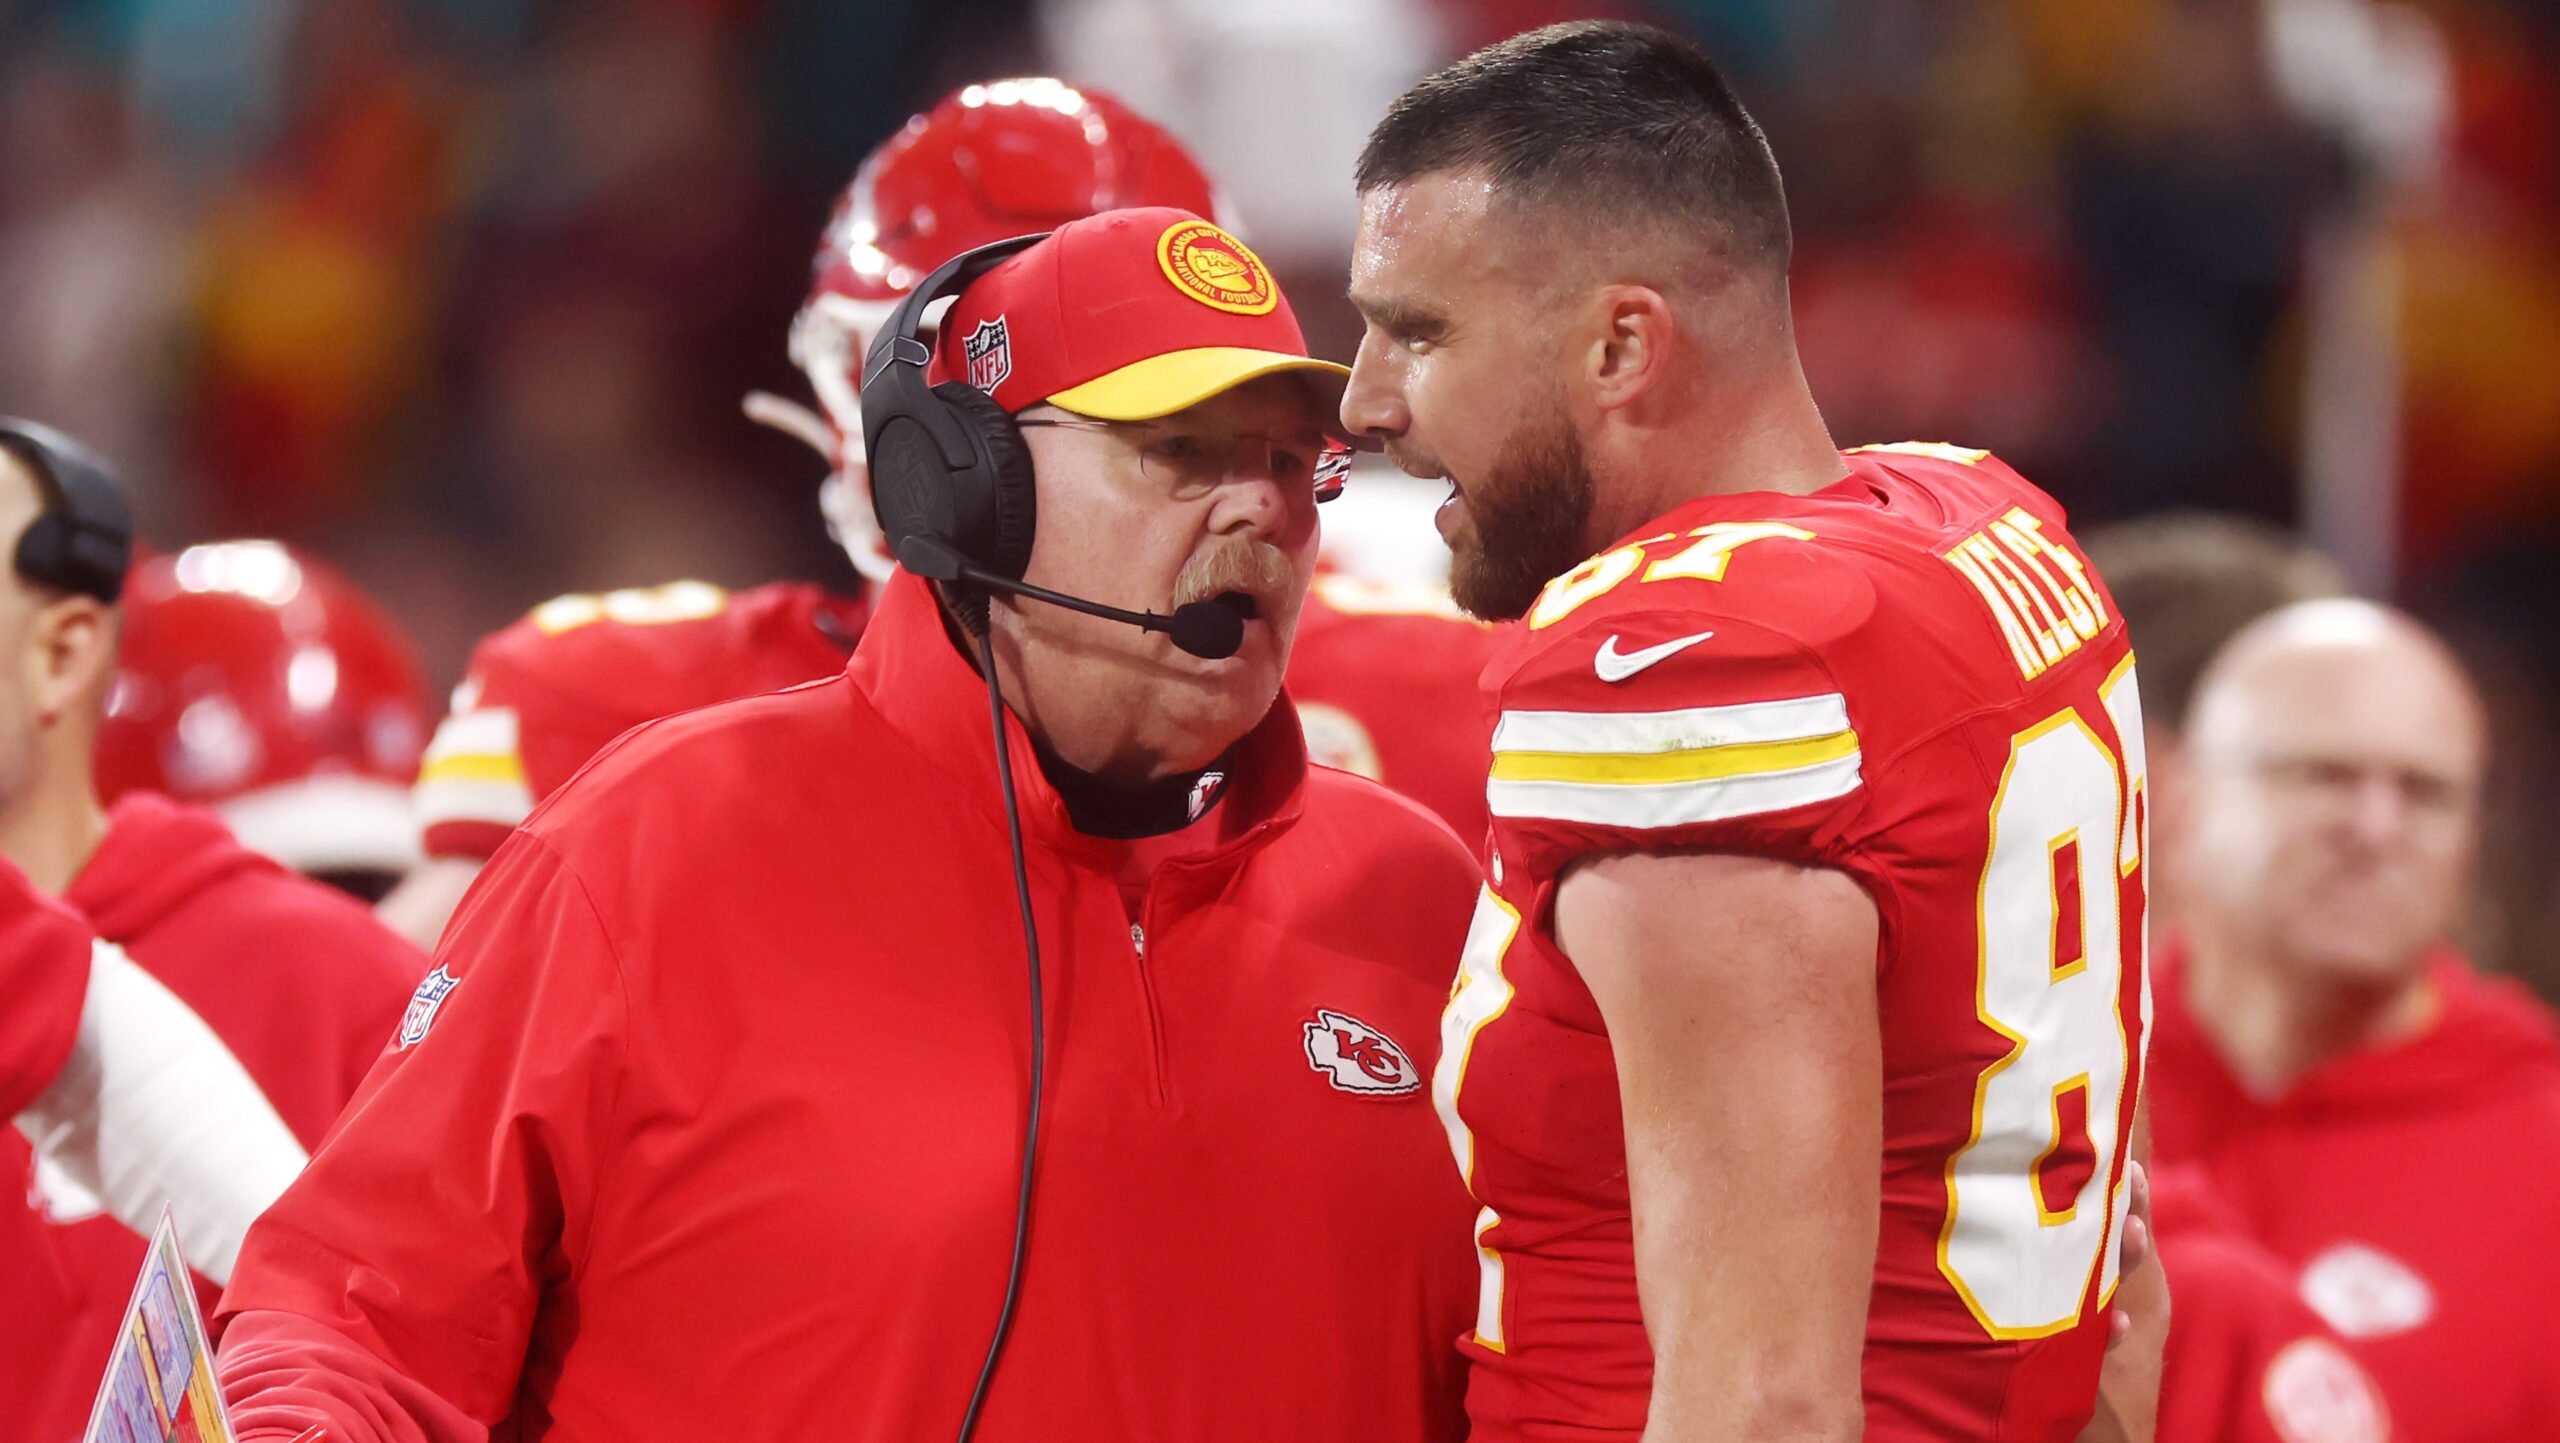 Video of Andy Reid's Angry Reaction to Travis Kelce Goes Viral